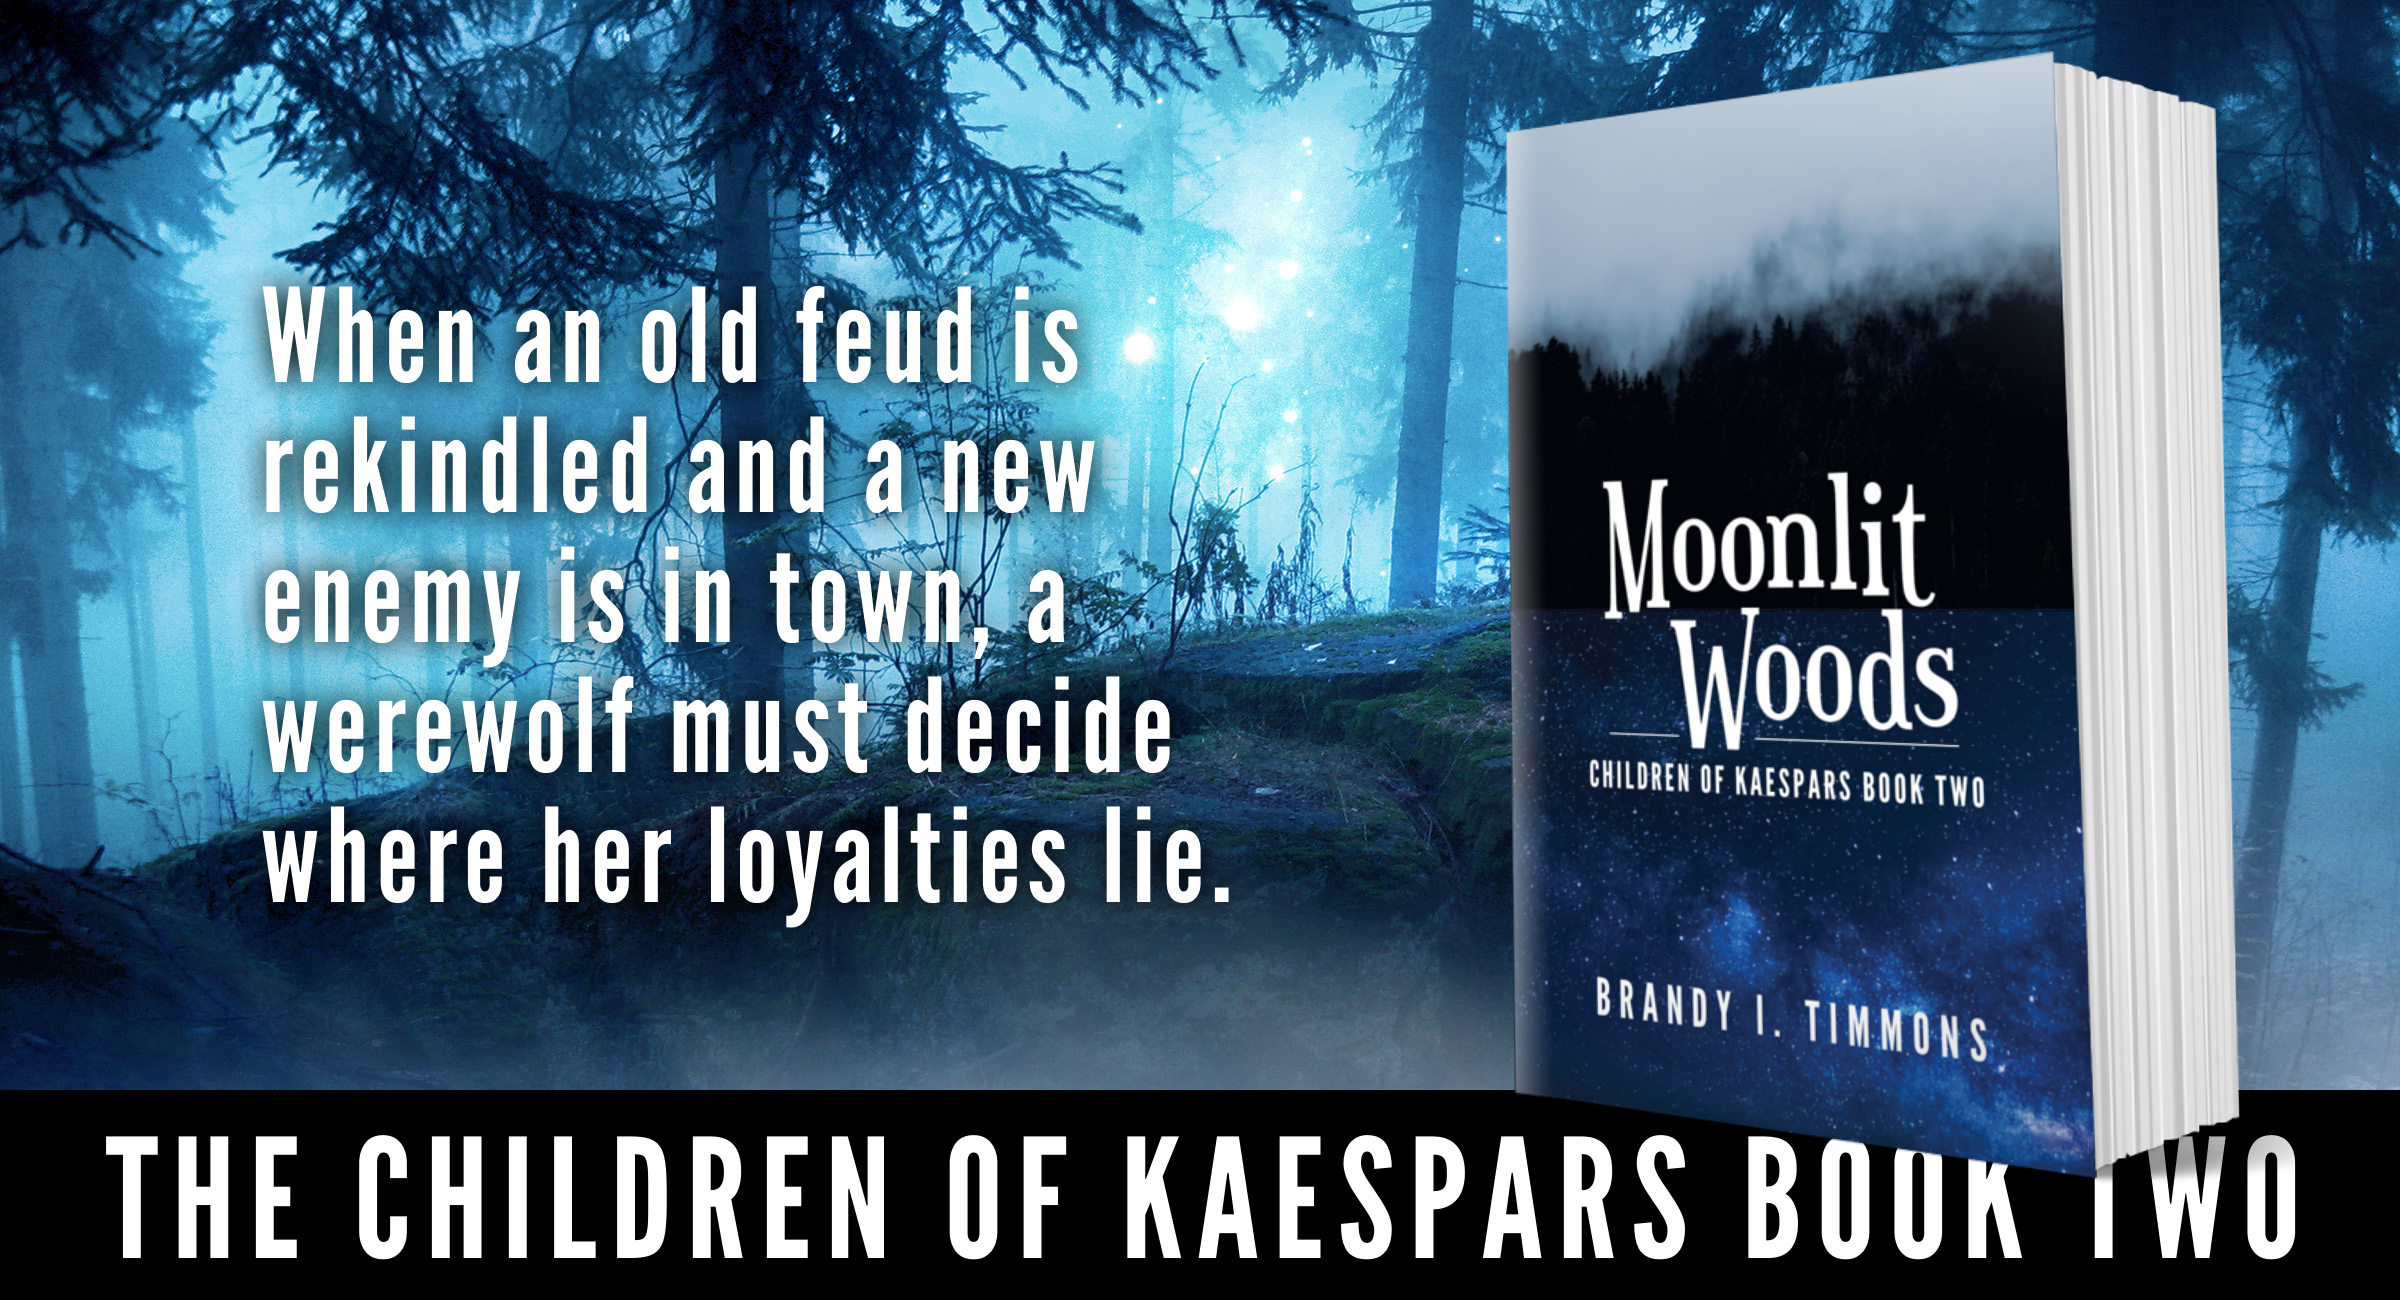 Moonlit Woods by Brandy I Timmons now available on Amazon